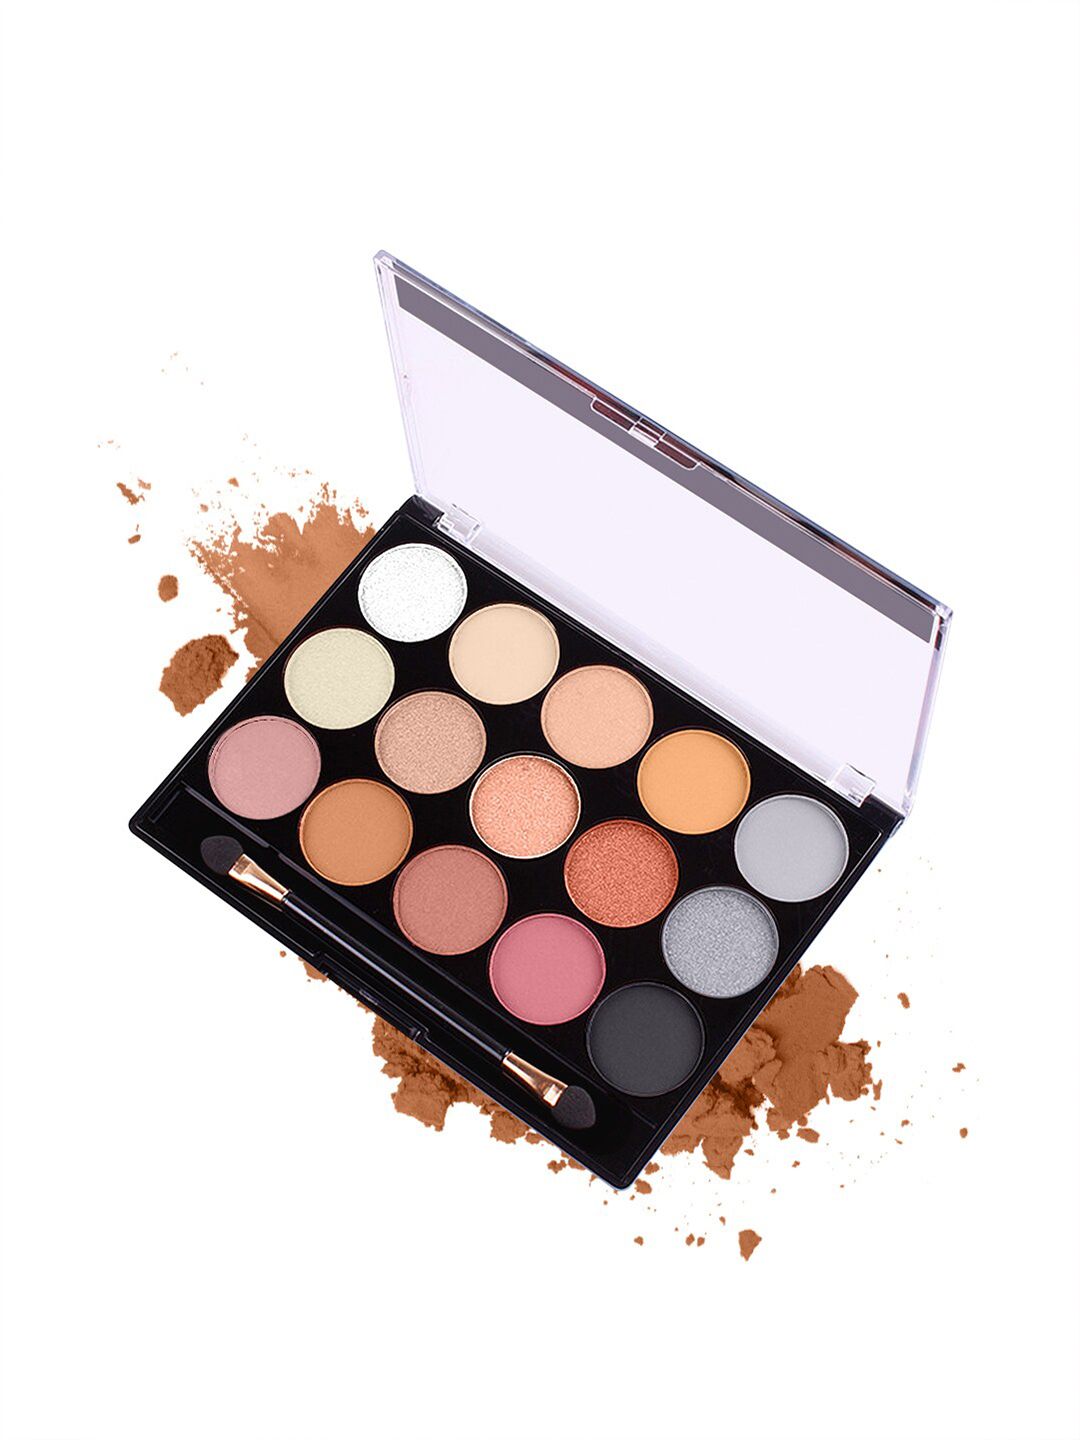 MISS ROSE 15 Multicolored Glitter Matte Eyeshadow Palette 7001-077 NT02 Price in India